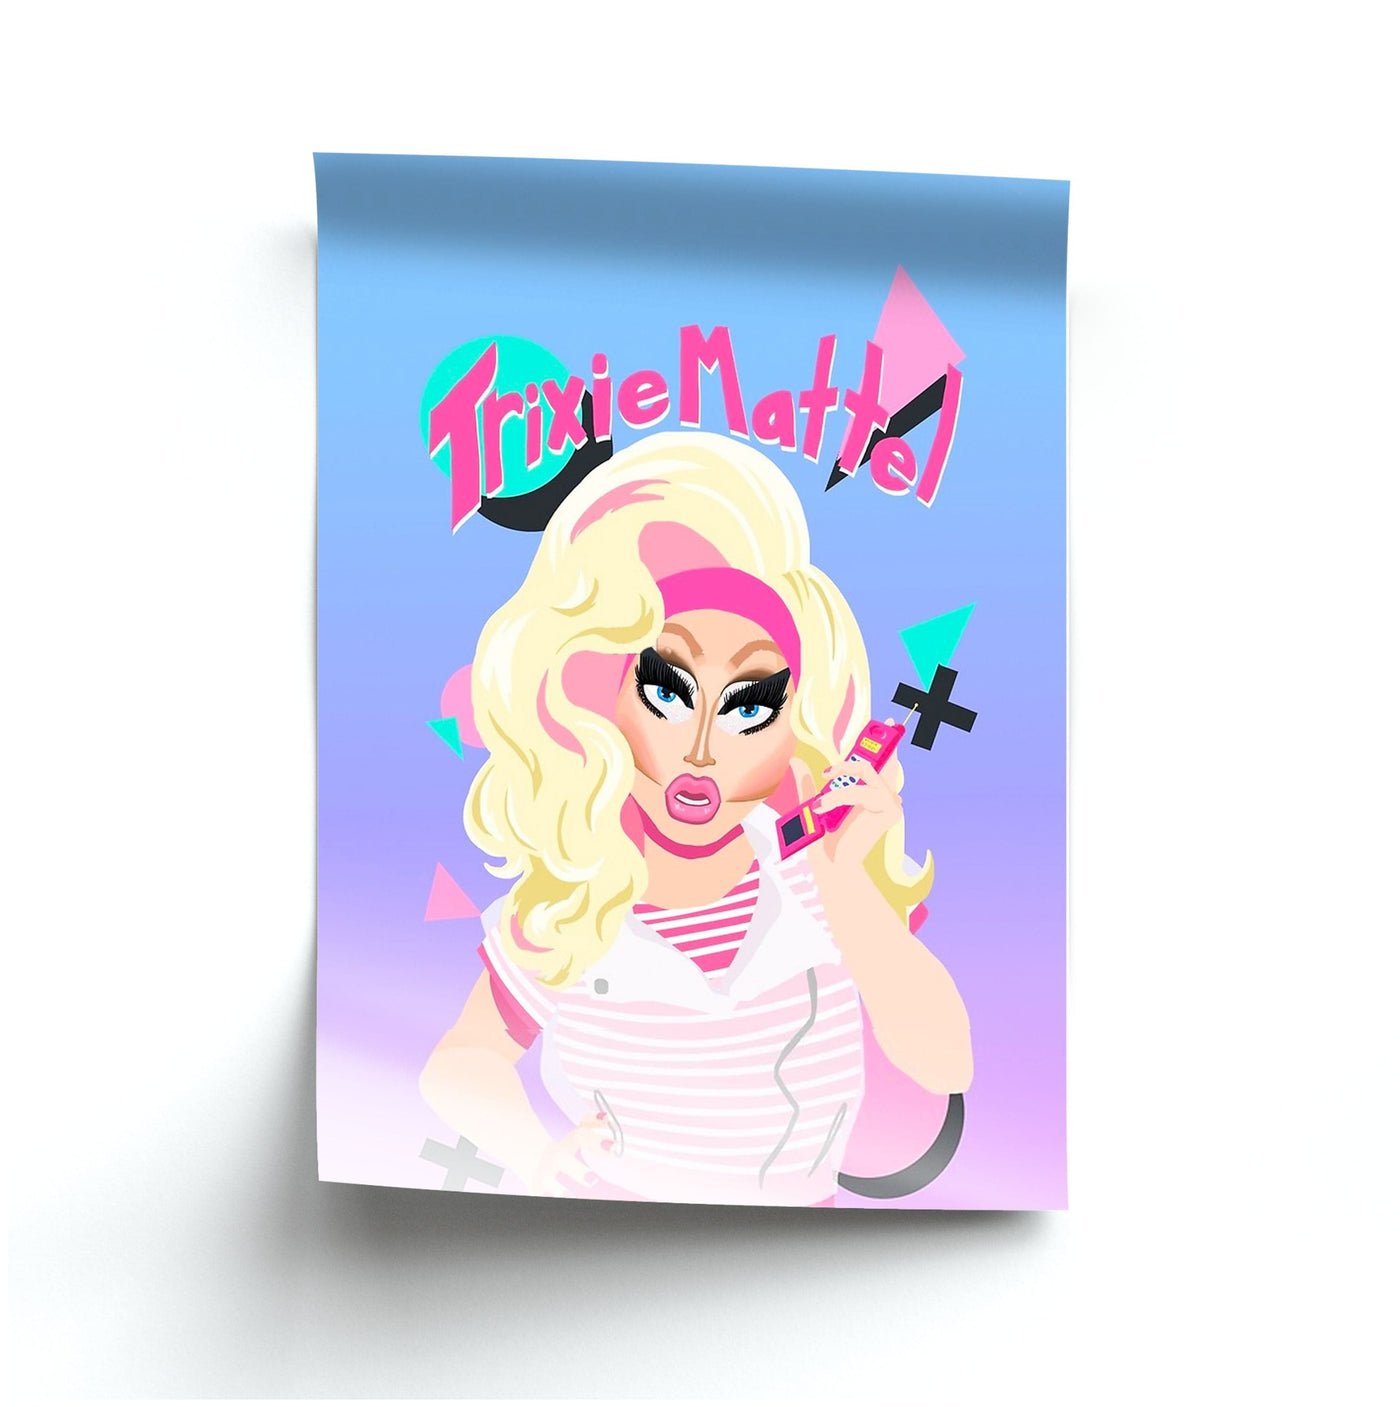 Trixie Mattel 80's Realness - RuPaul's Drag Race Poster